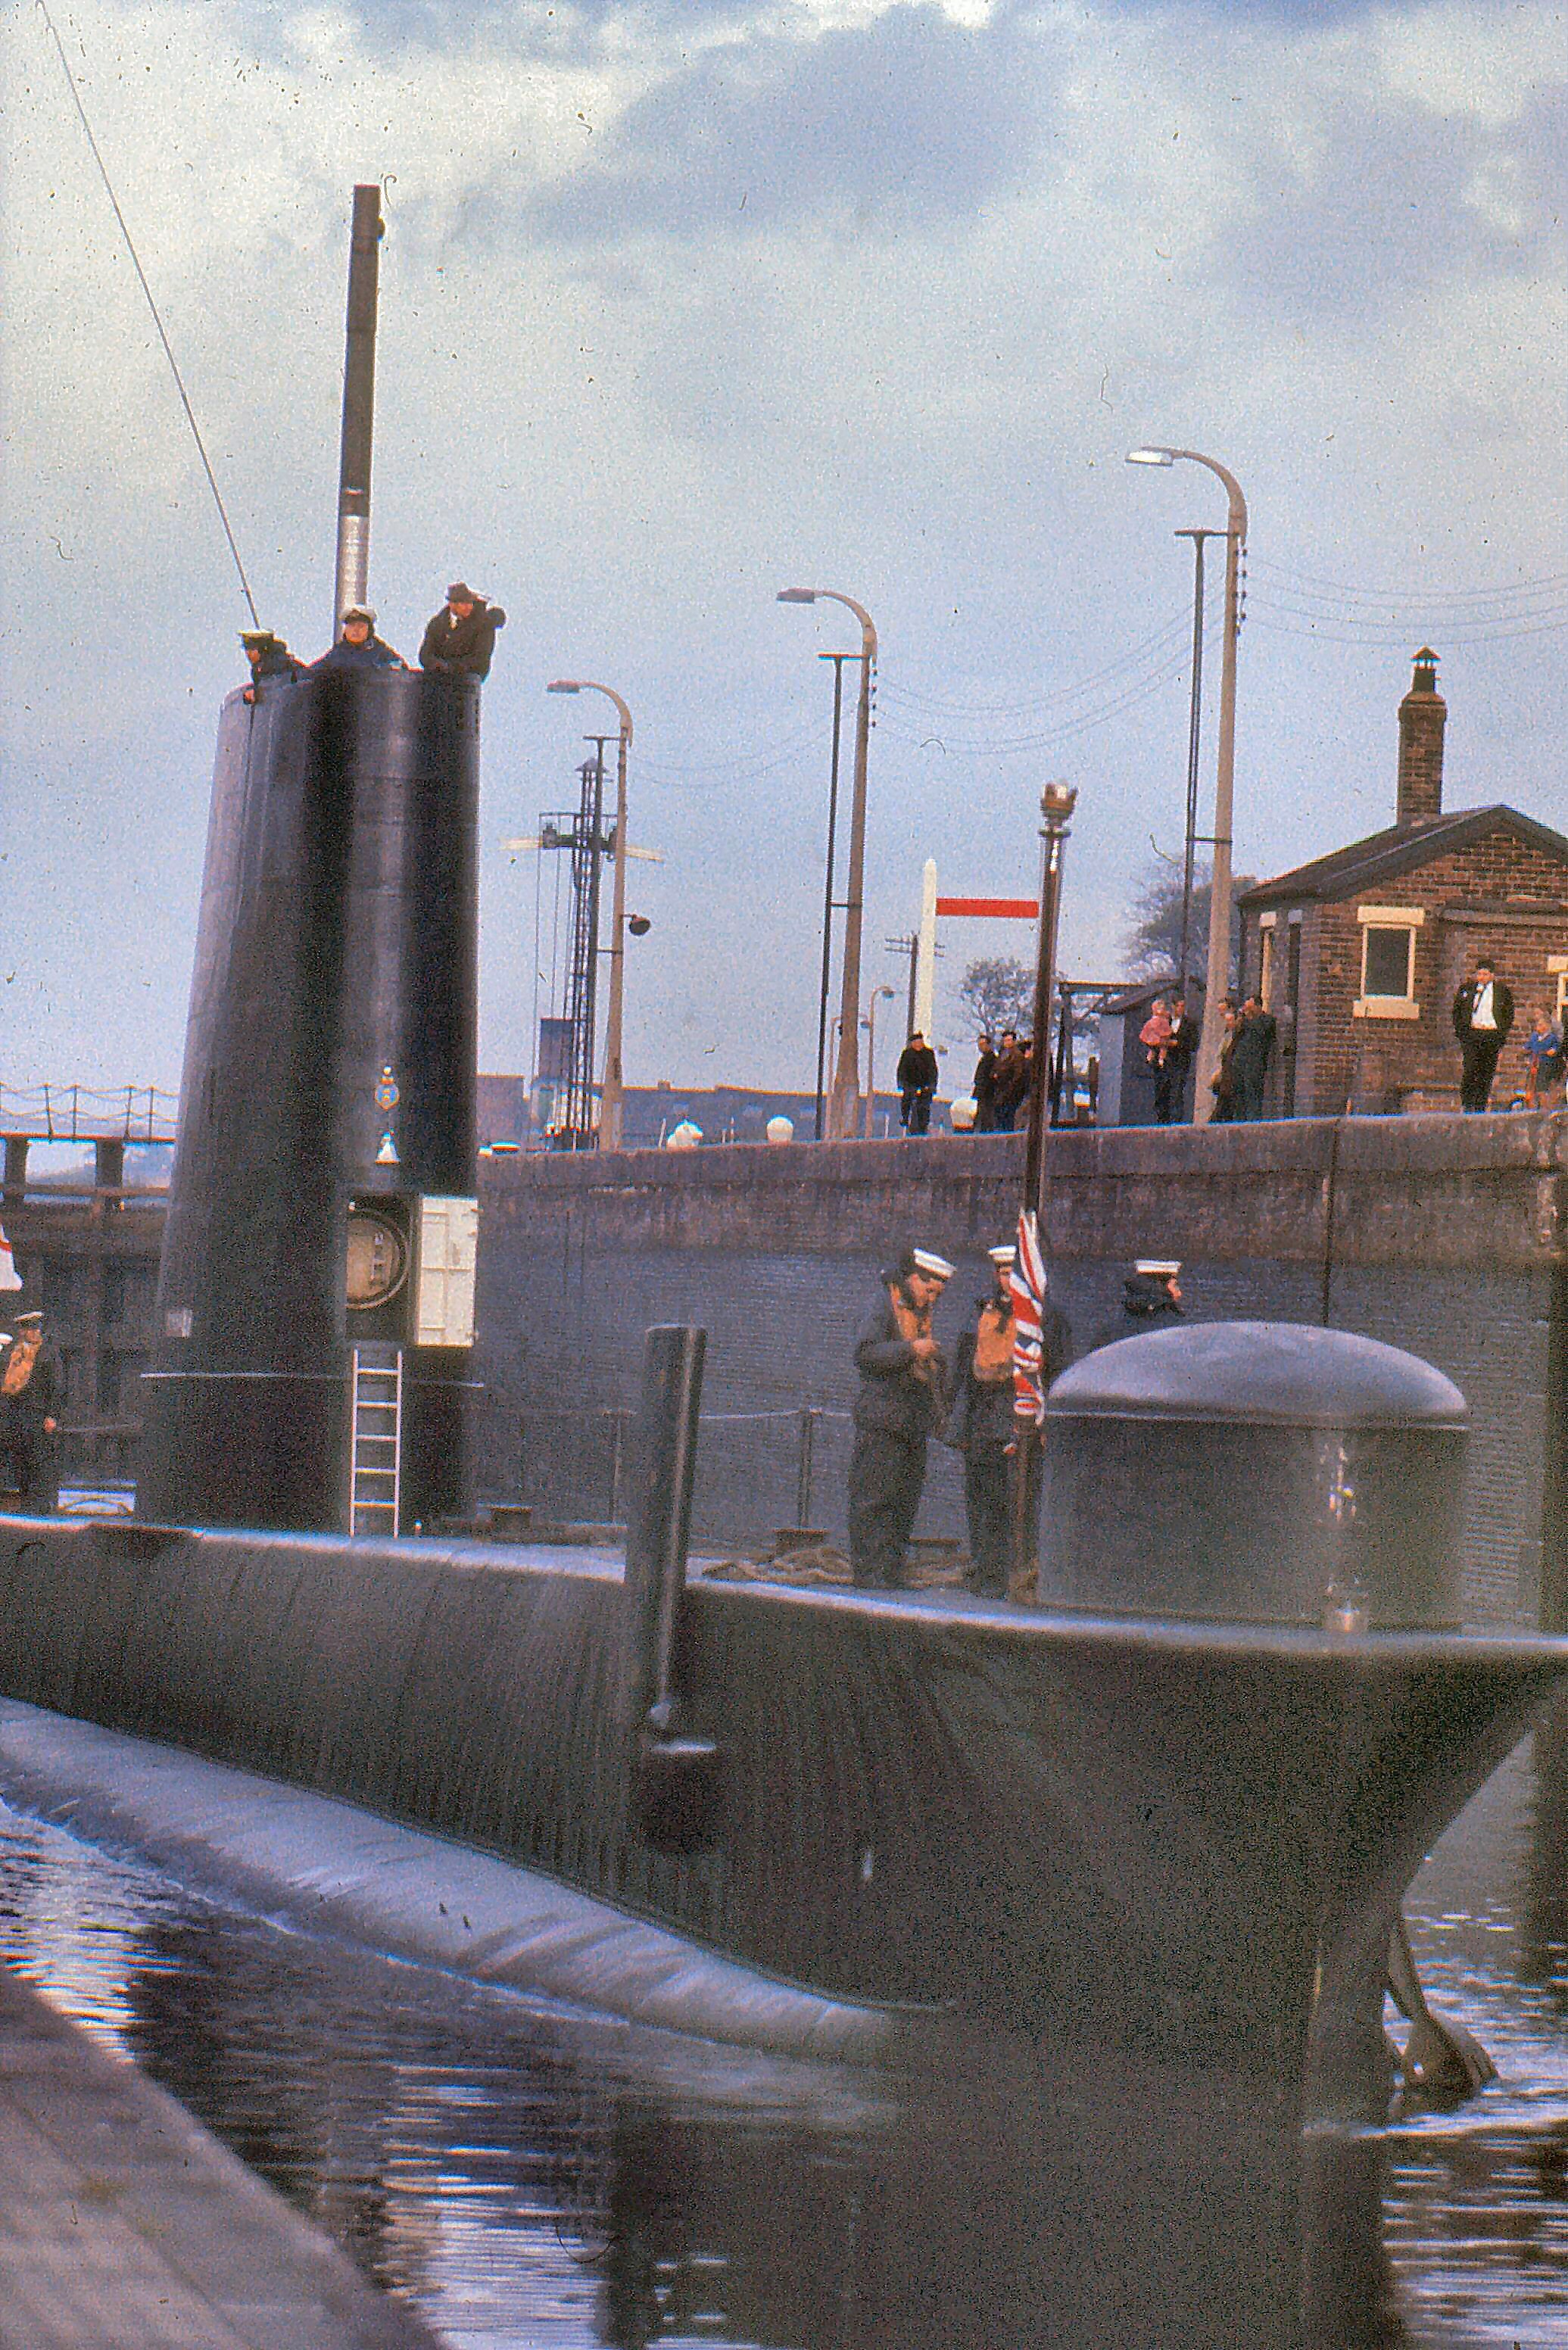 Submarines were spotted on the Manchester Ship Canal at Latchford Locks in the 1960s (Images: Eddie Whitham)